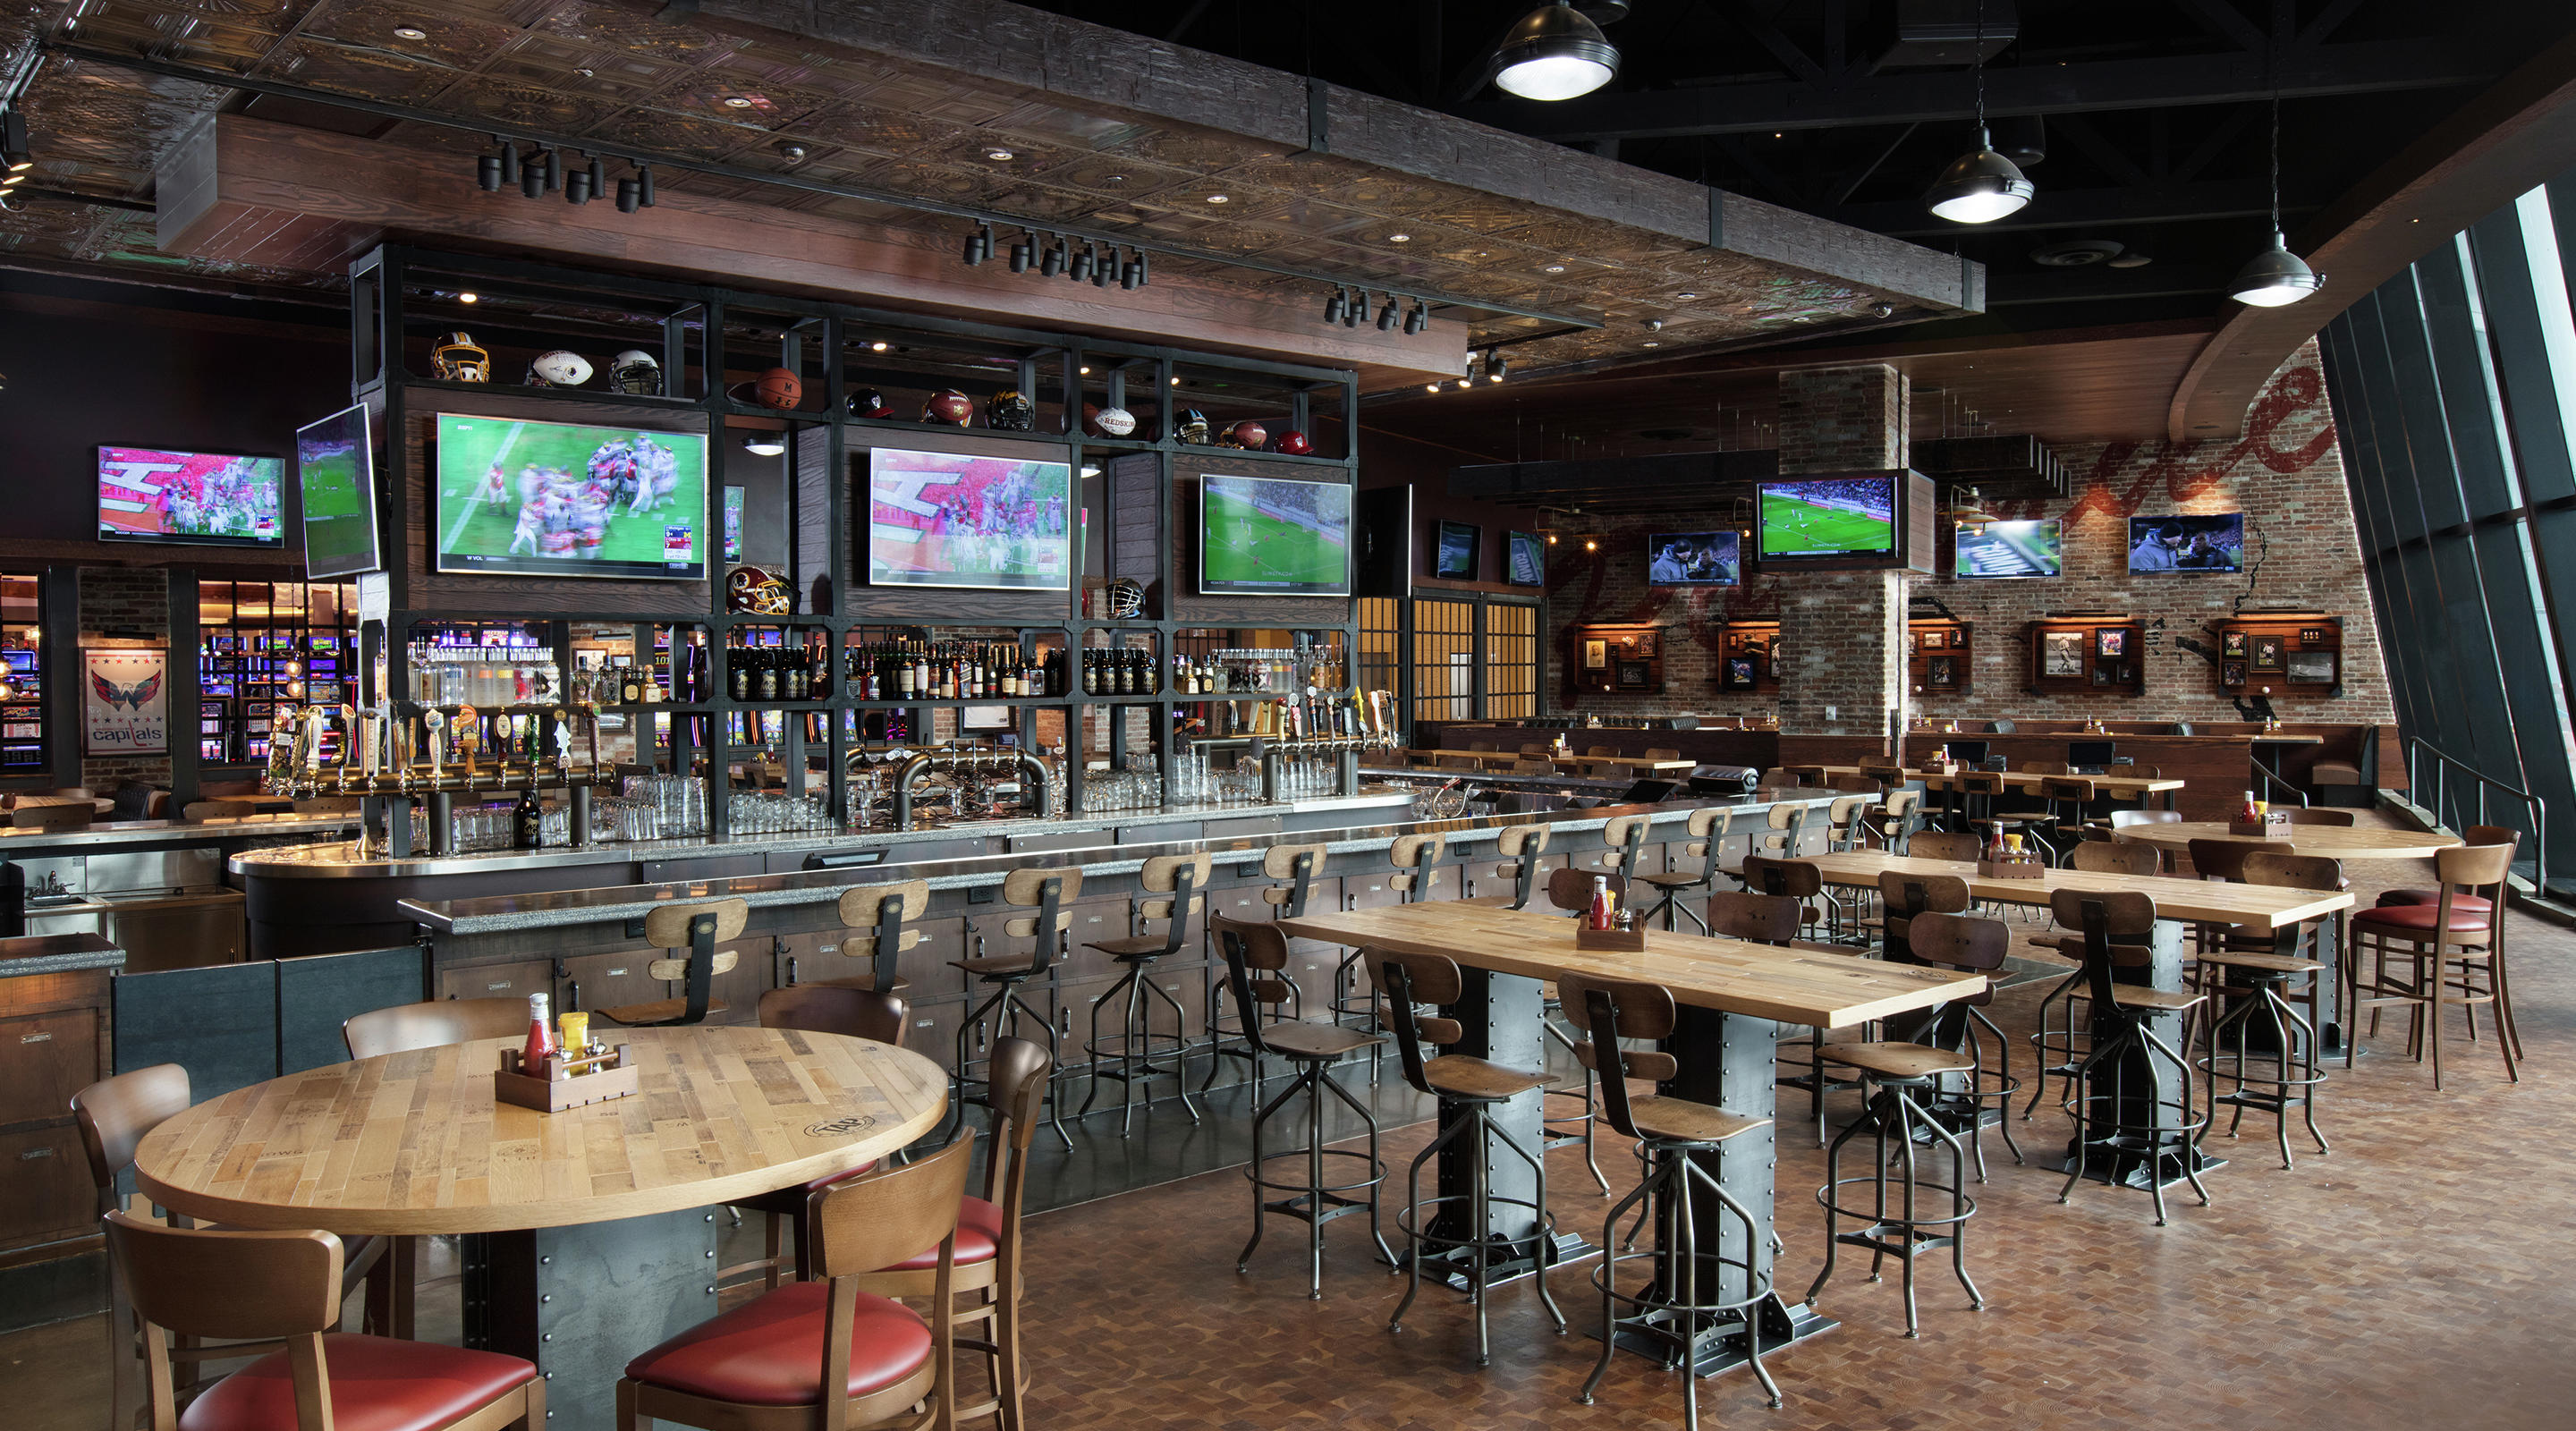 TAP is the perfect place to root for your favorite teams.